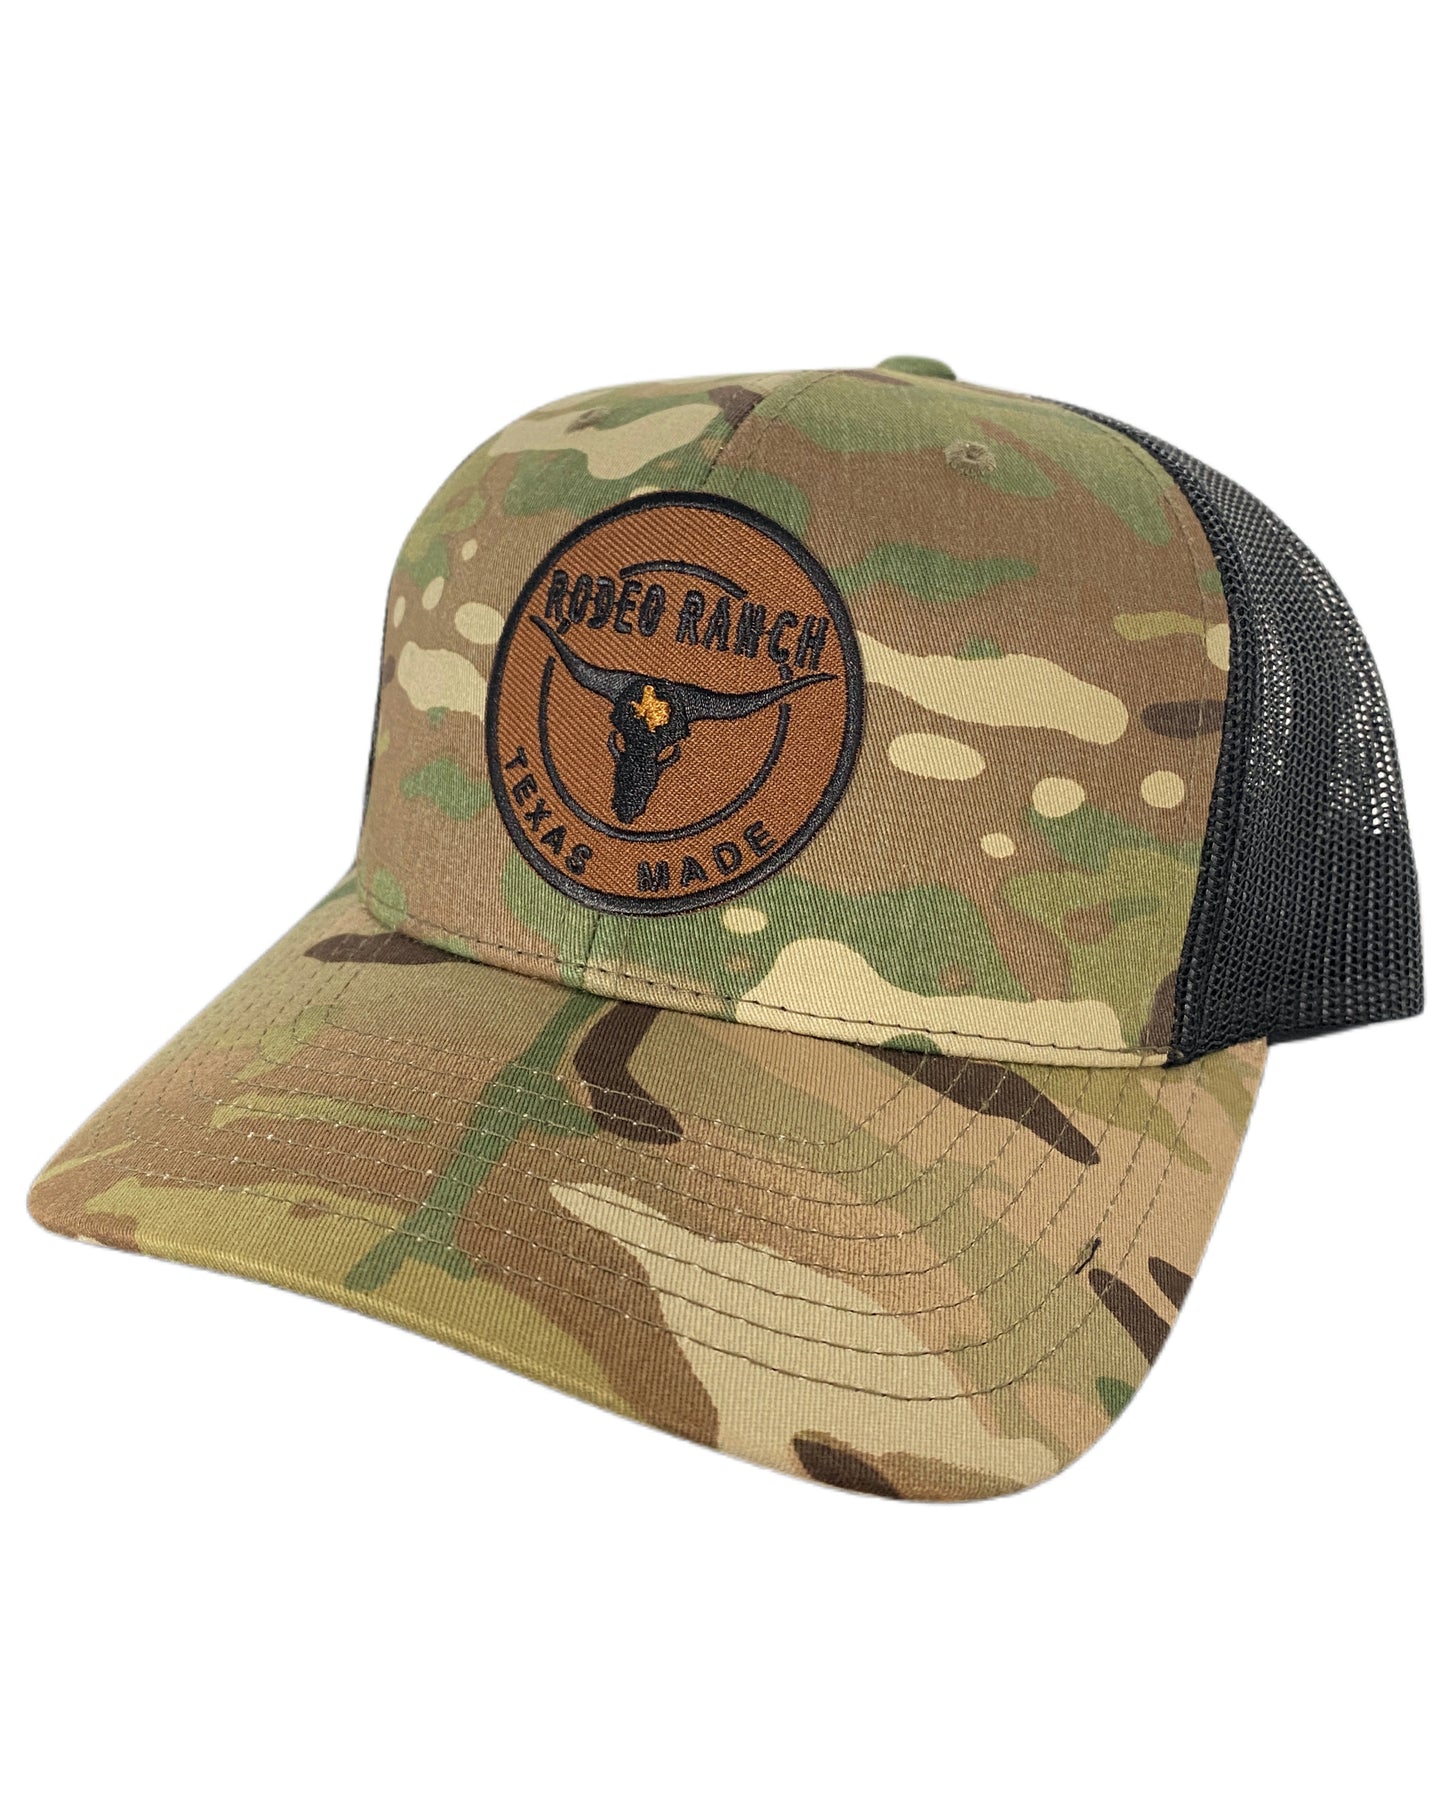 Rodeo Ranch Texas Made Hat - Camo and Black